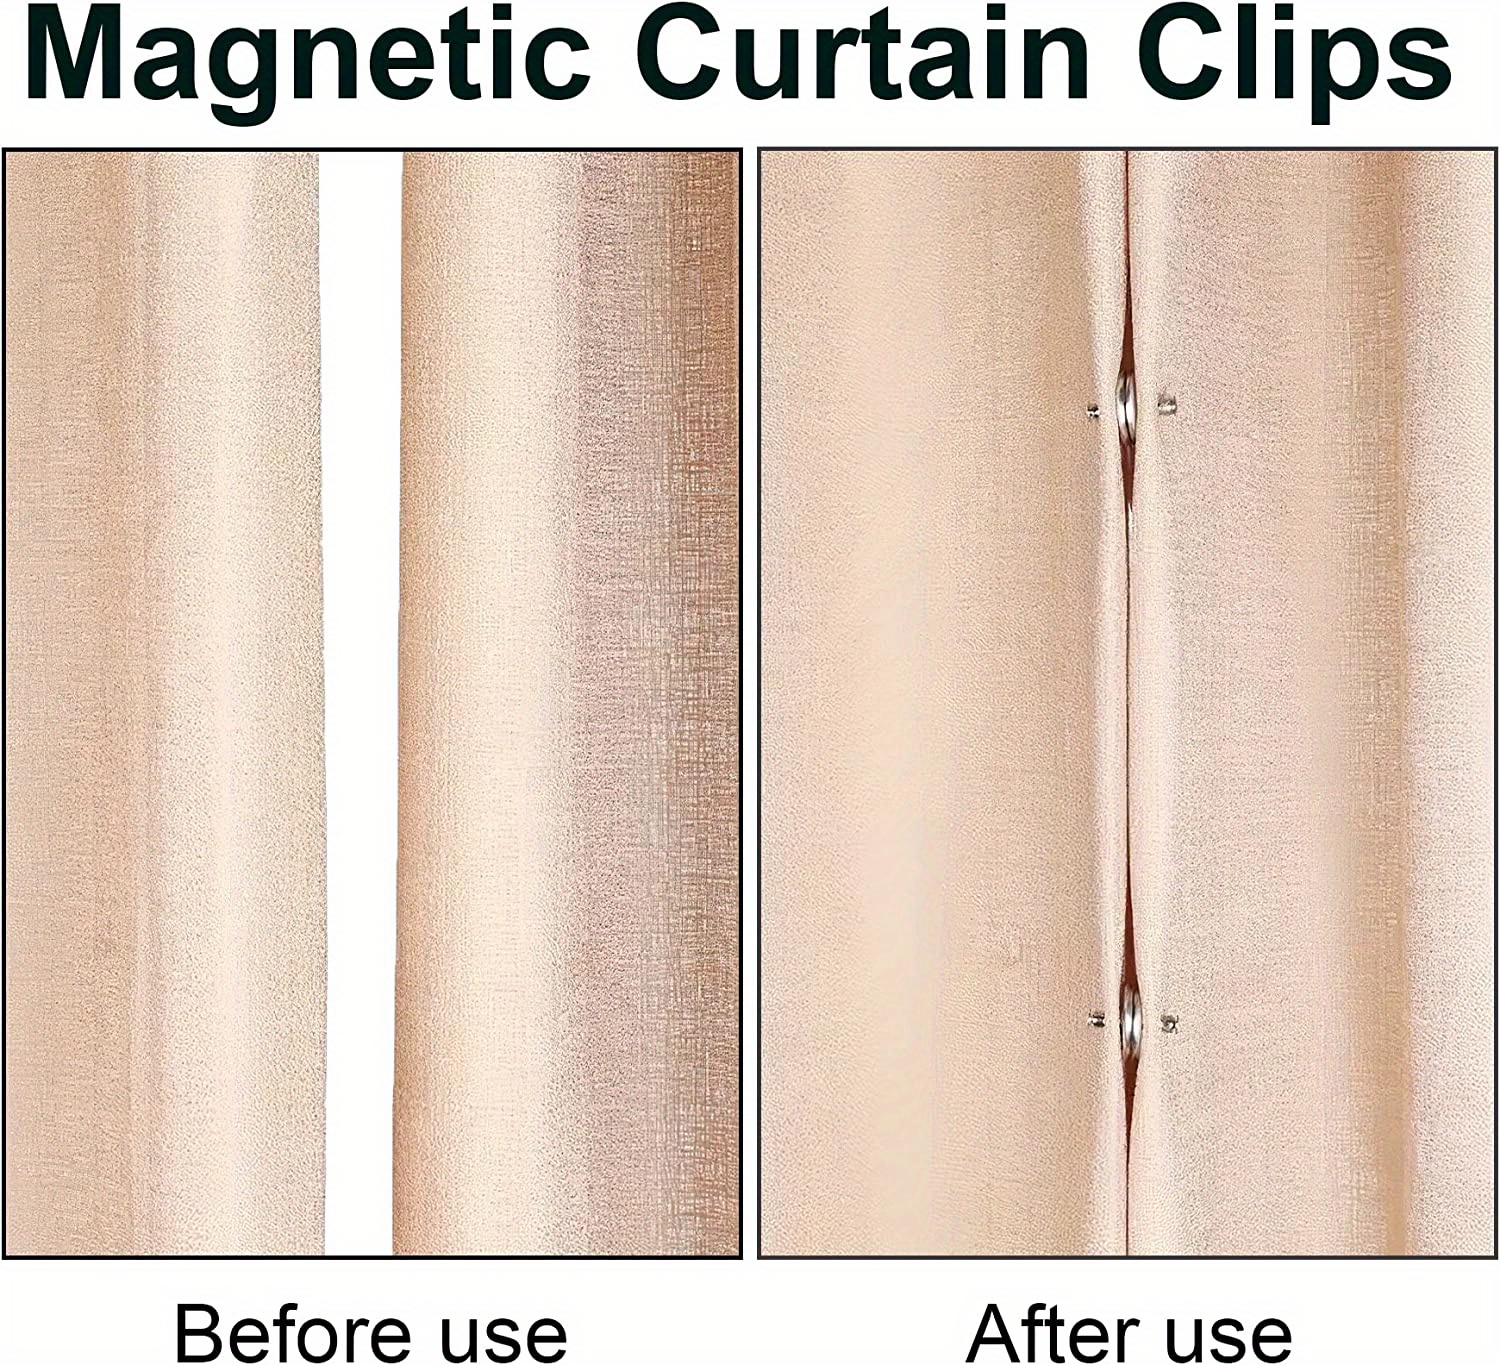  Jcabin Curtain Magnets Closure 6 Pairs, Curtain Weights Magnets  Button to Keep Curtain Closed Prevents Light Leakage and Curtains from  Being Blown Around with 12 Self-Adhesive Patches : Home & Kitchen